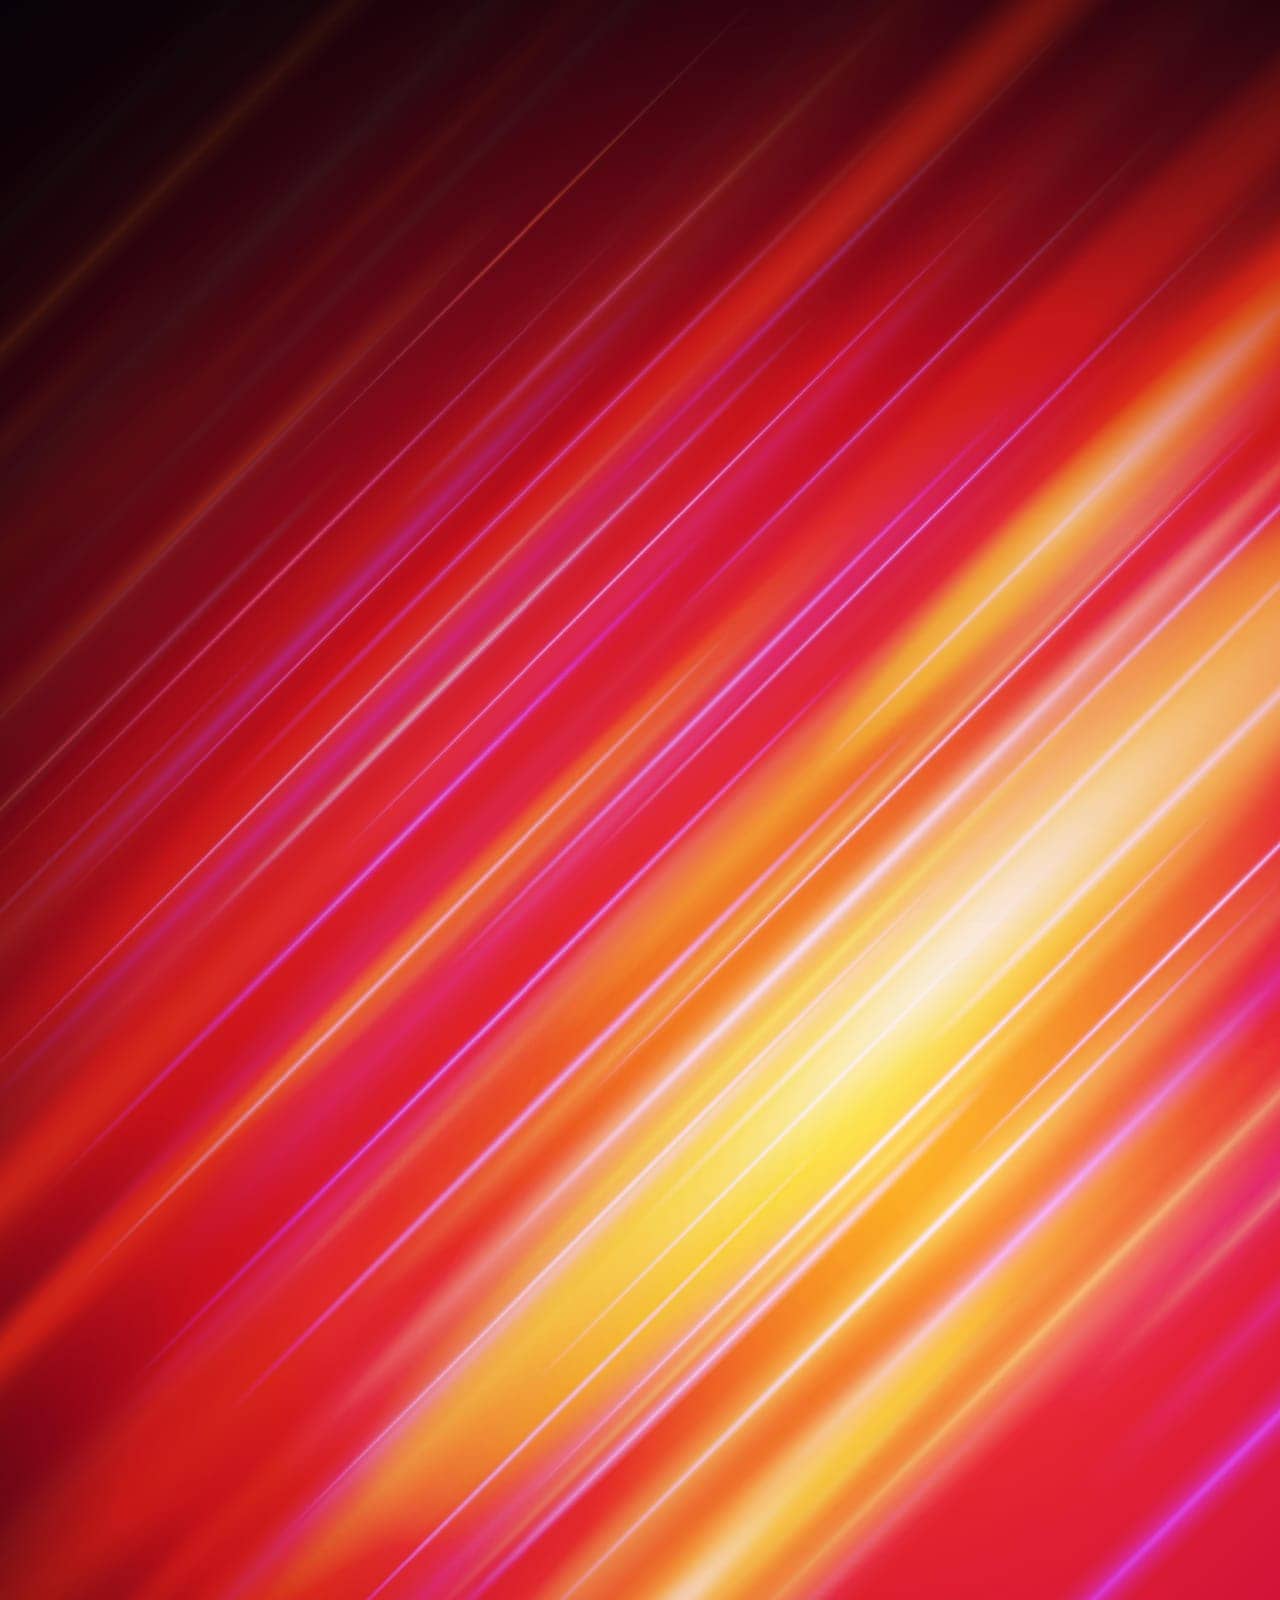 Streaks of yellow and pink light create a dynamic abstract pattern, conveying motion and energy.